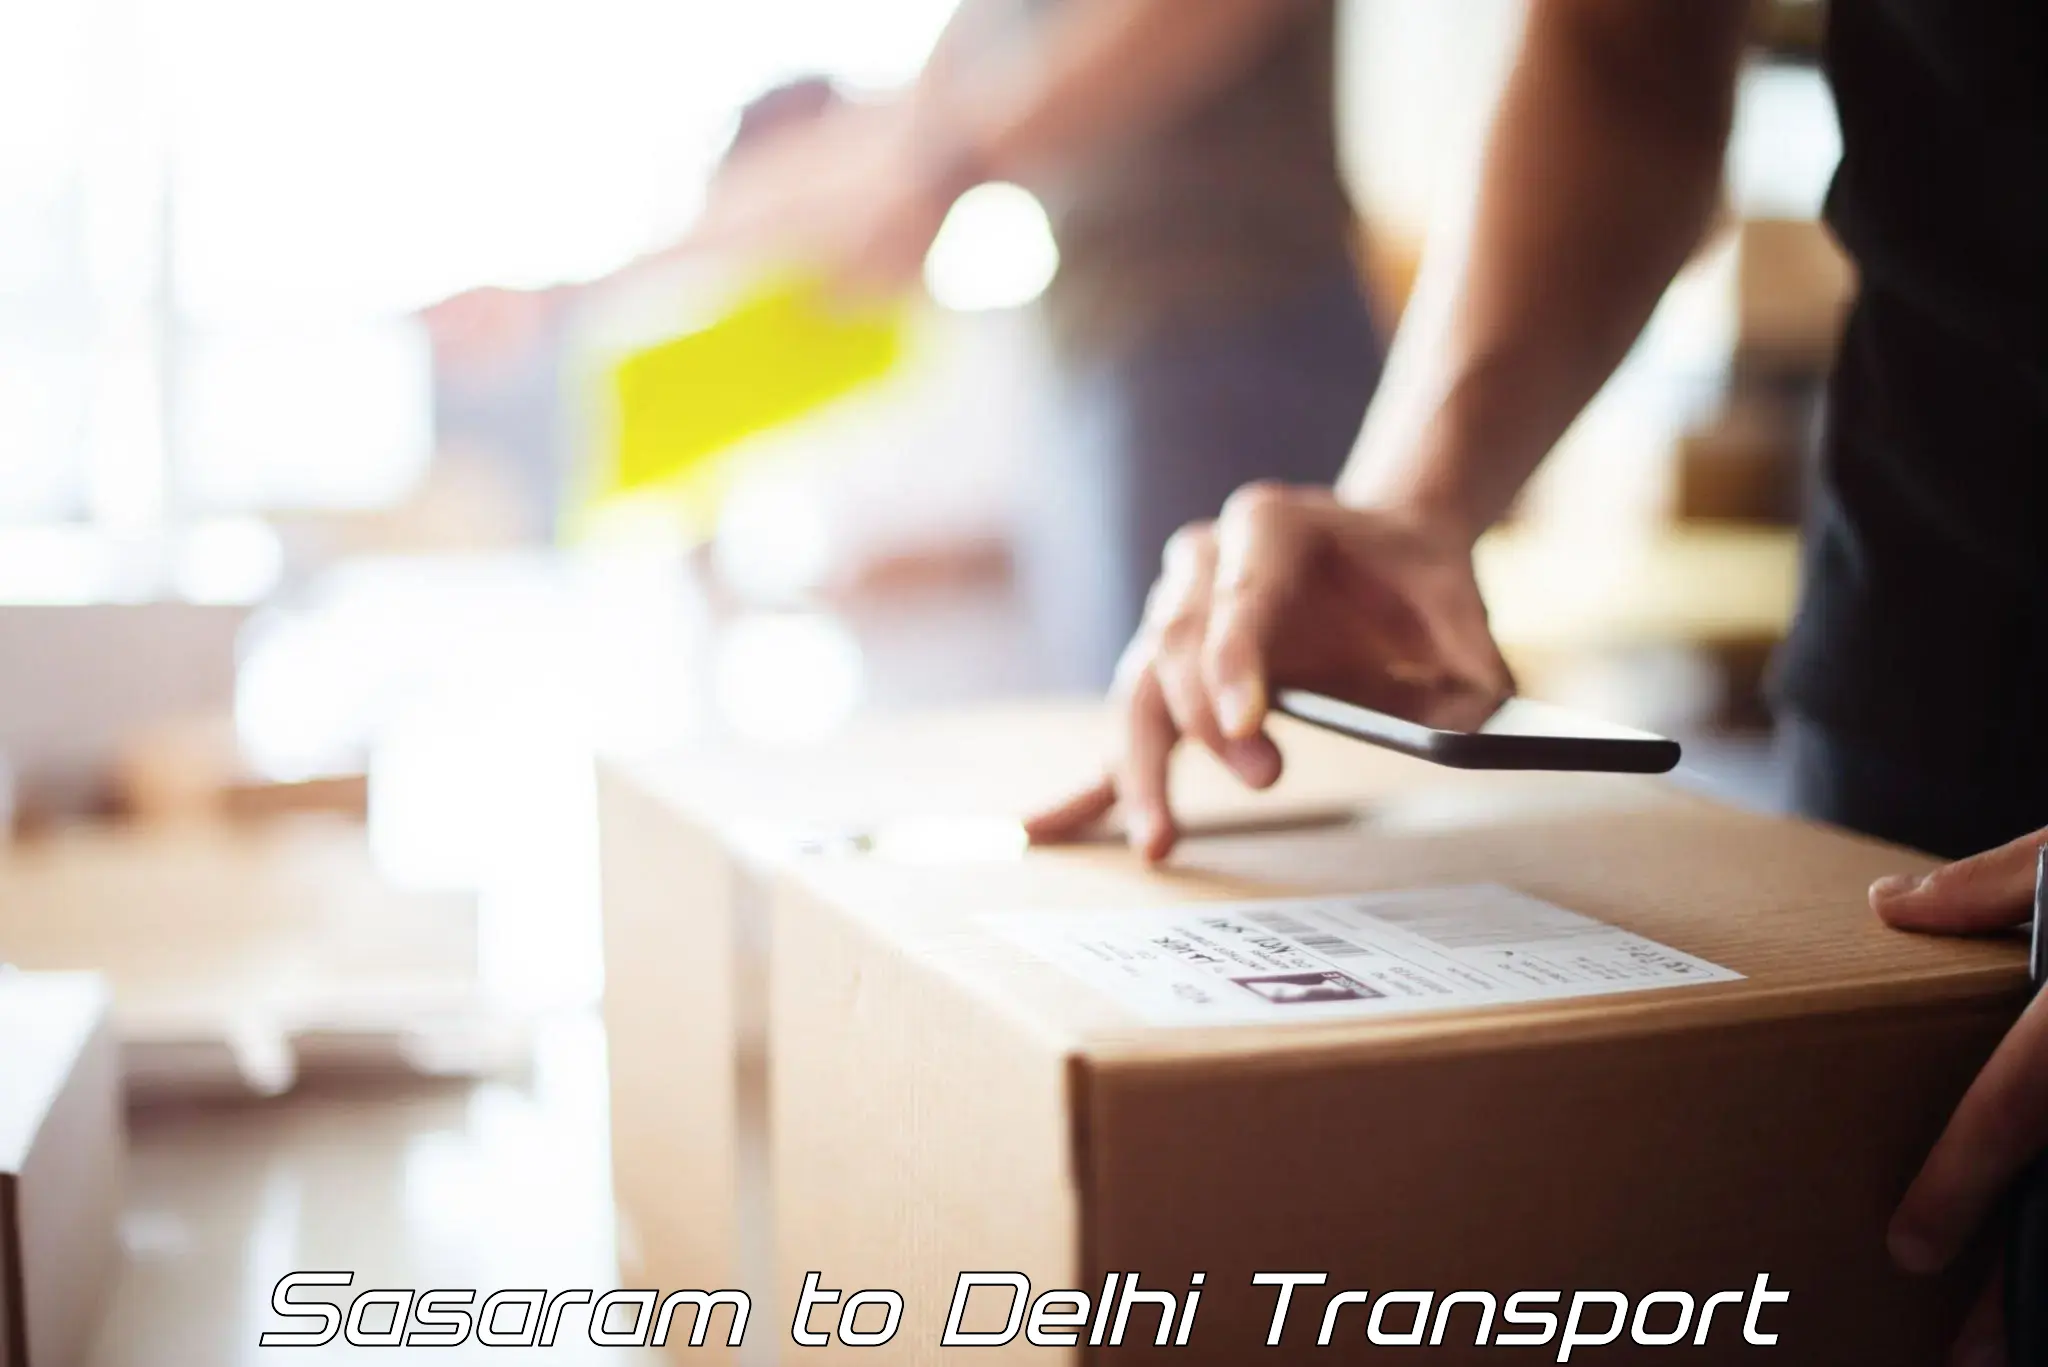 Transport shared services in Sasaram to Delhi